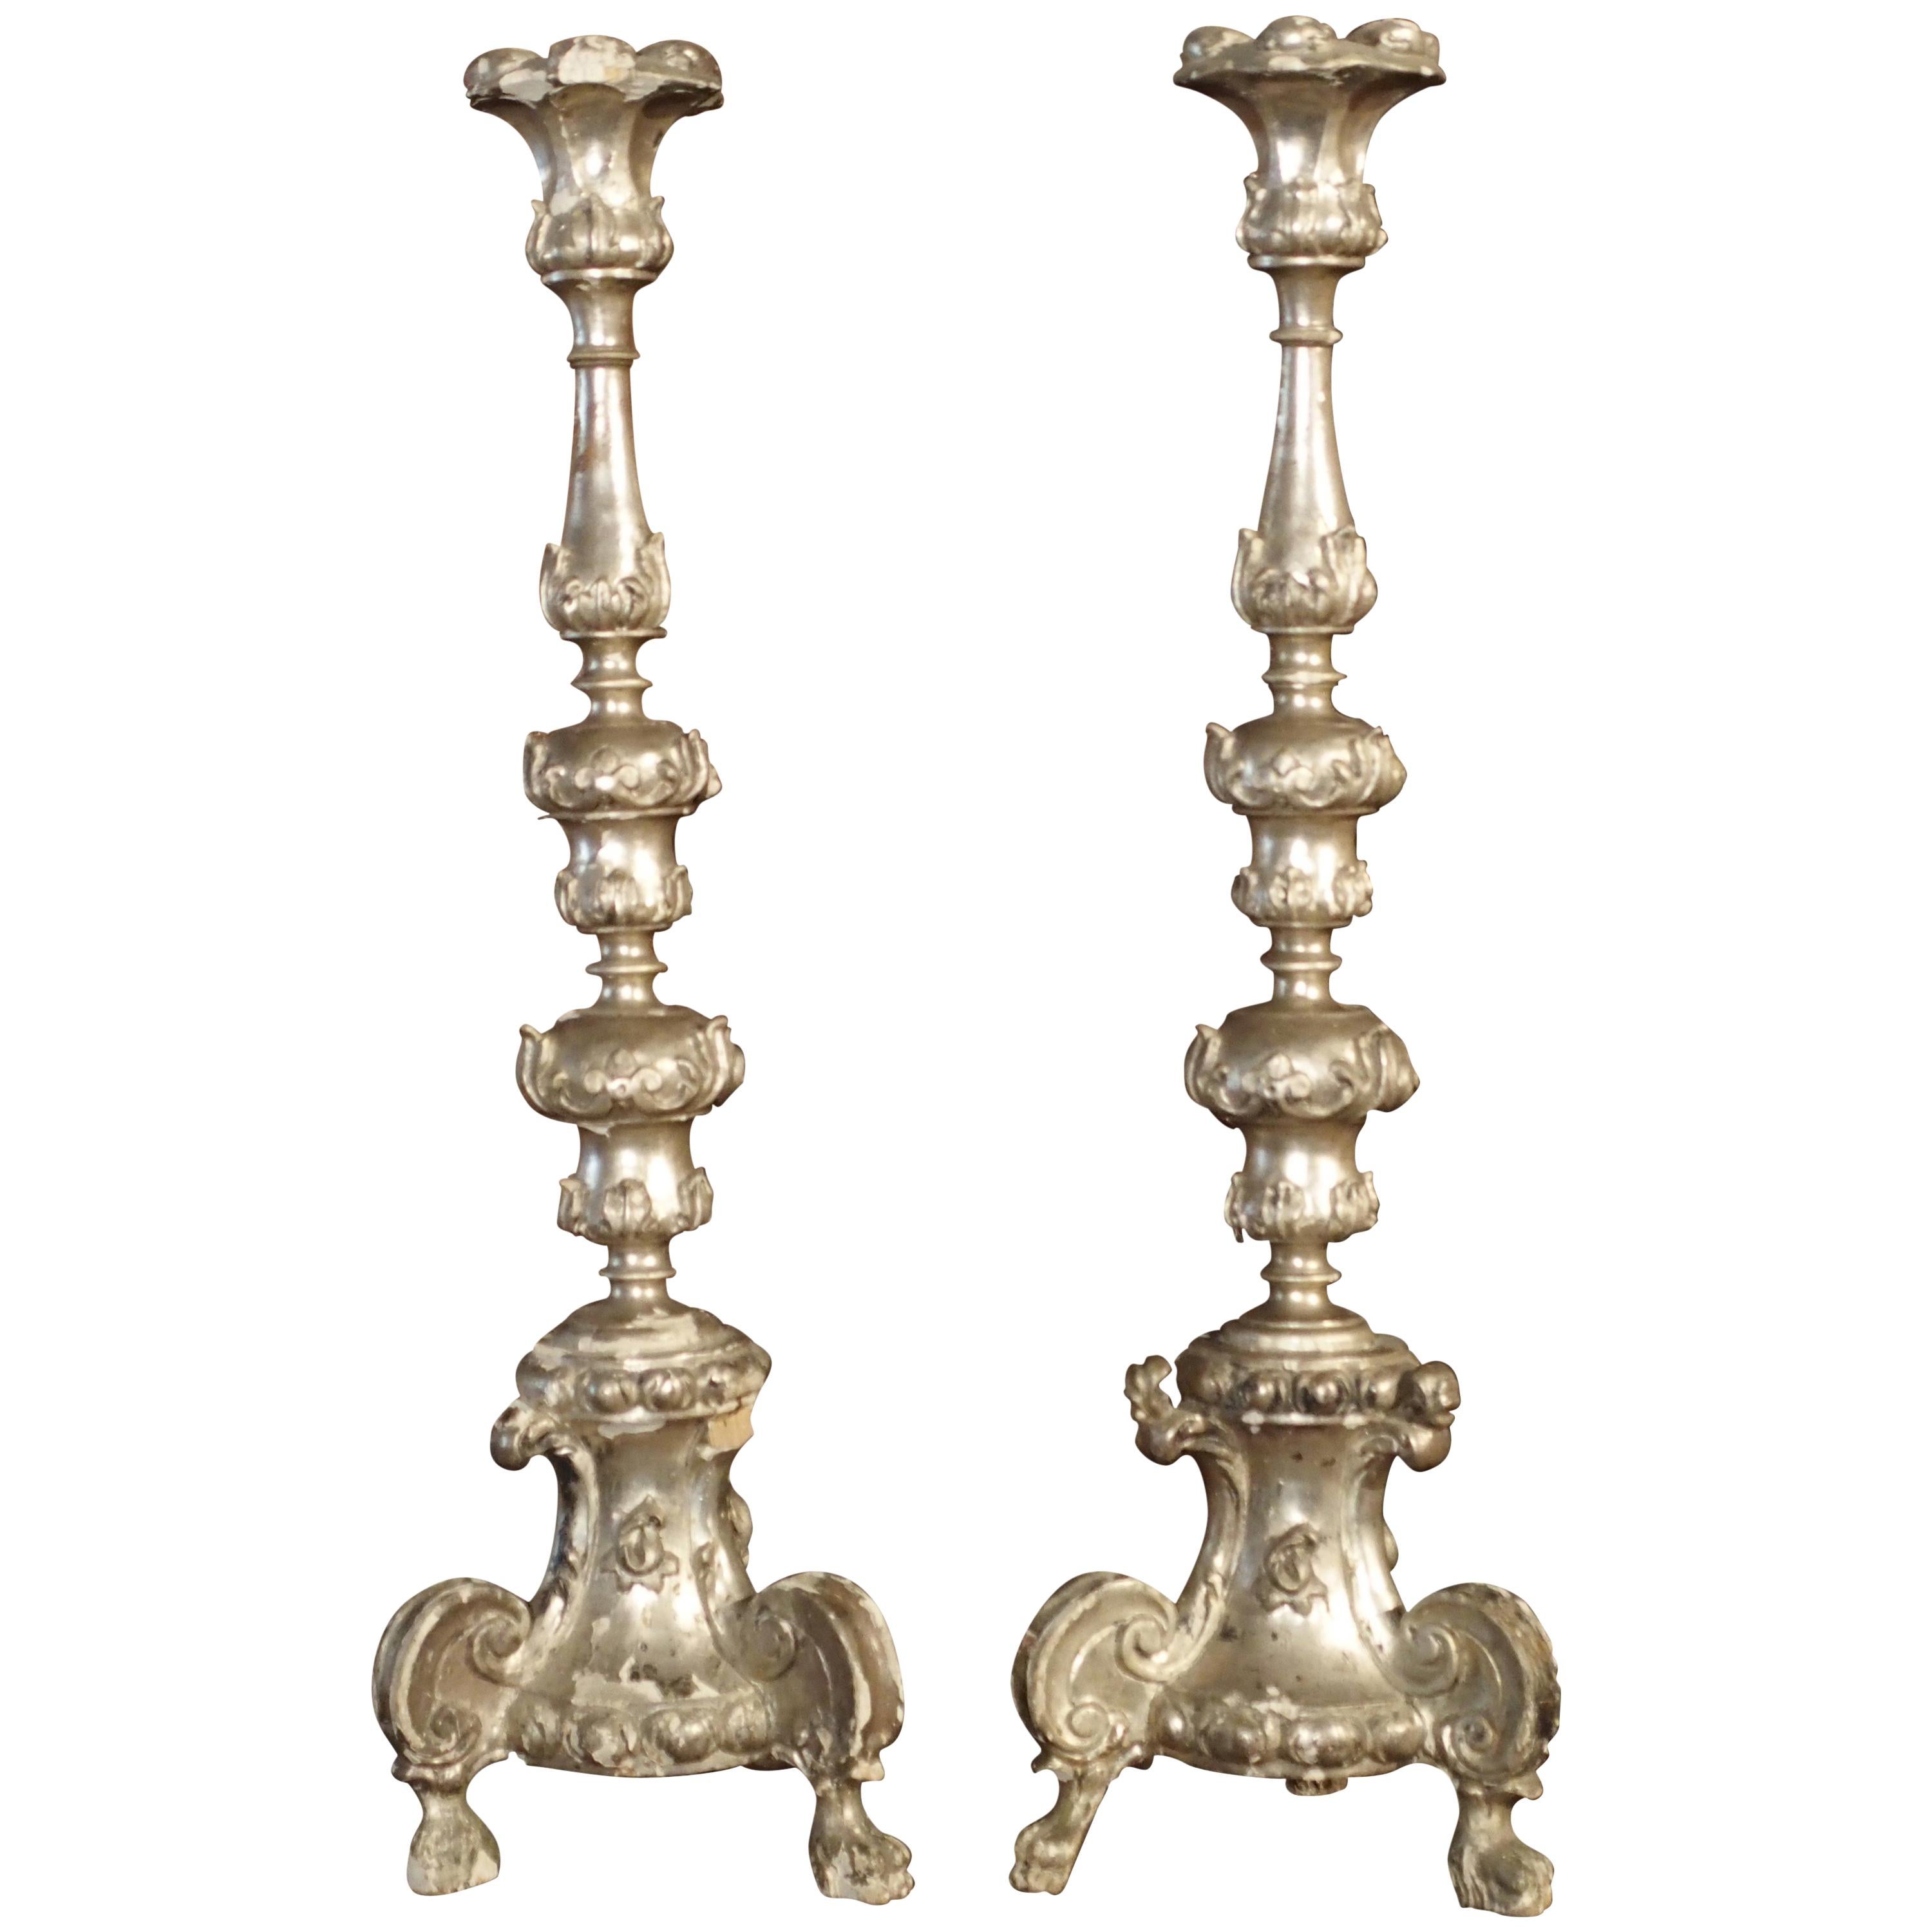 Pair of Tall 17th Century Silverleaf Candlesticks from Italy